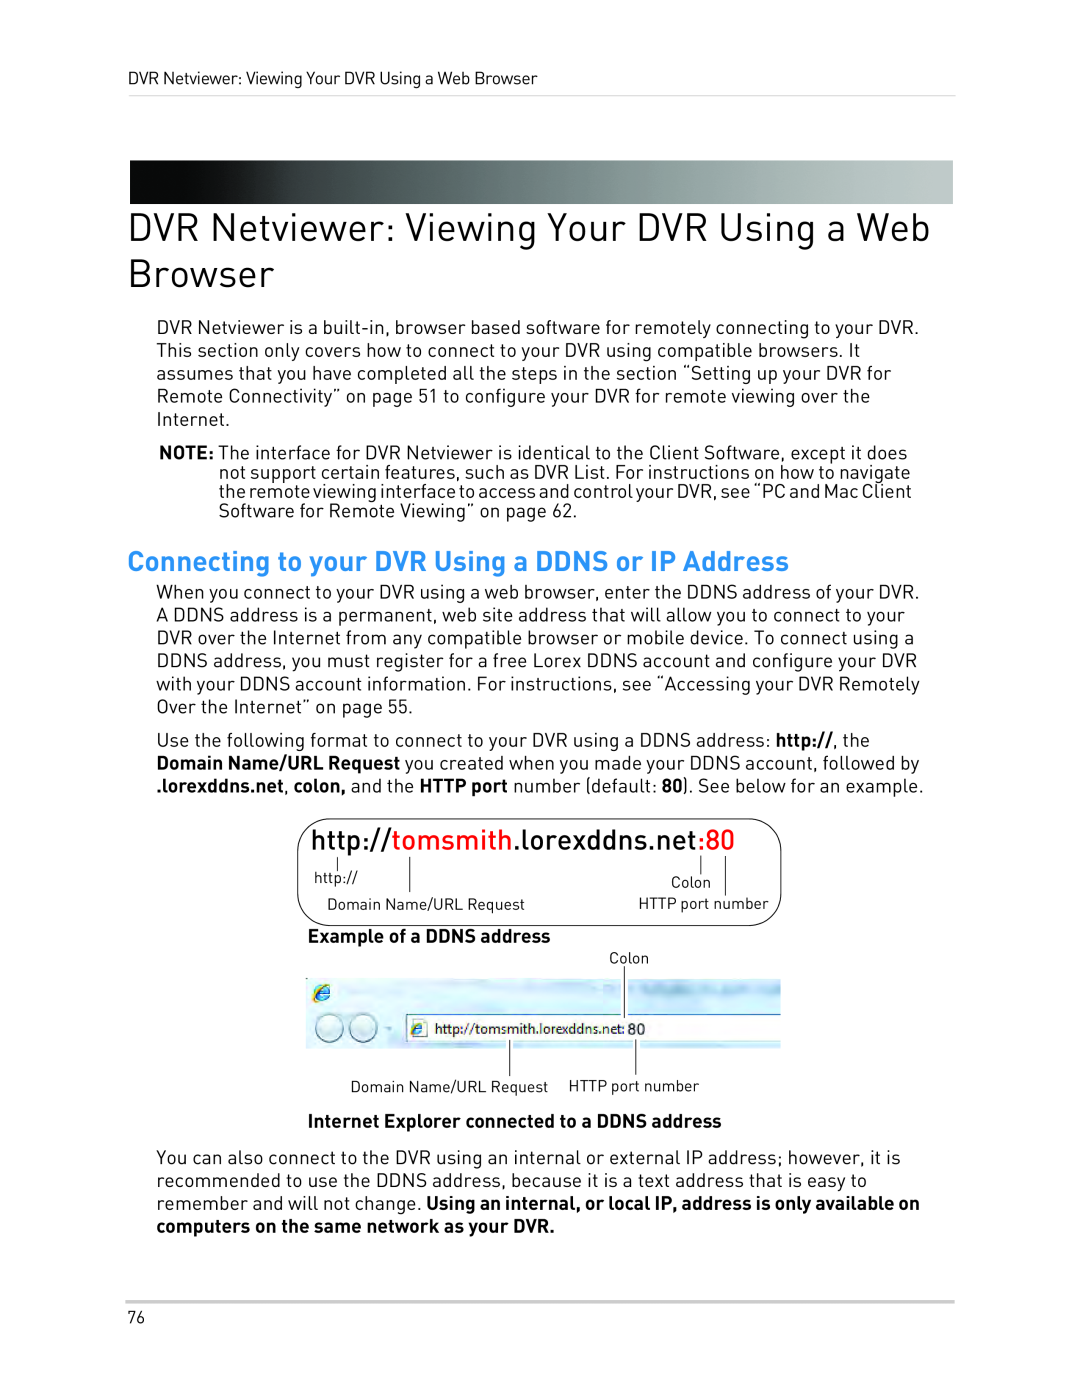 LOREX Technology LH3481001C8B, LH340 EDGE3 Connecting to your DVR Using a DDNS or IP Address, Example of a DDNS address 